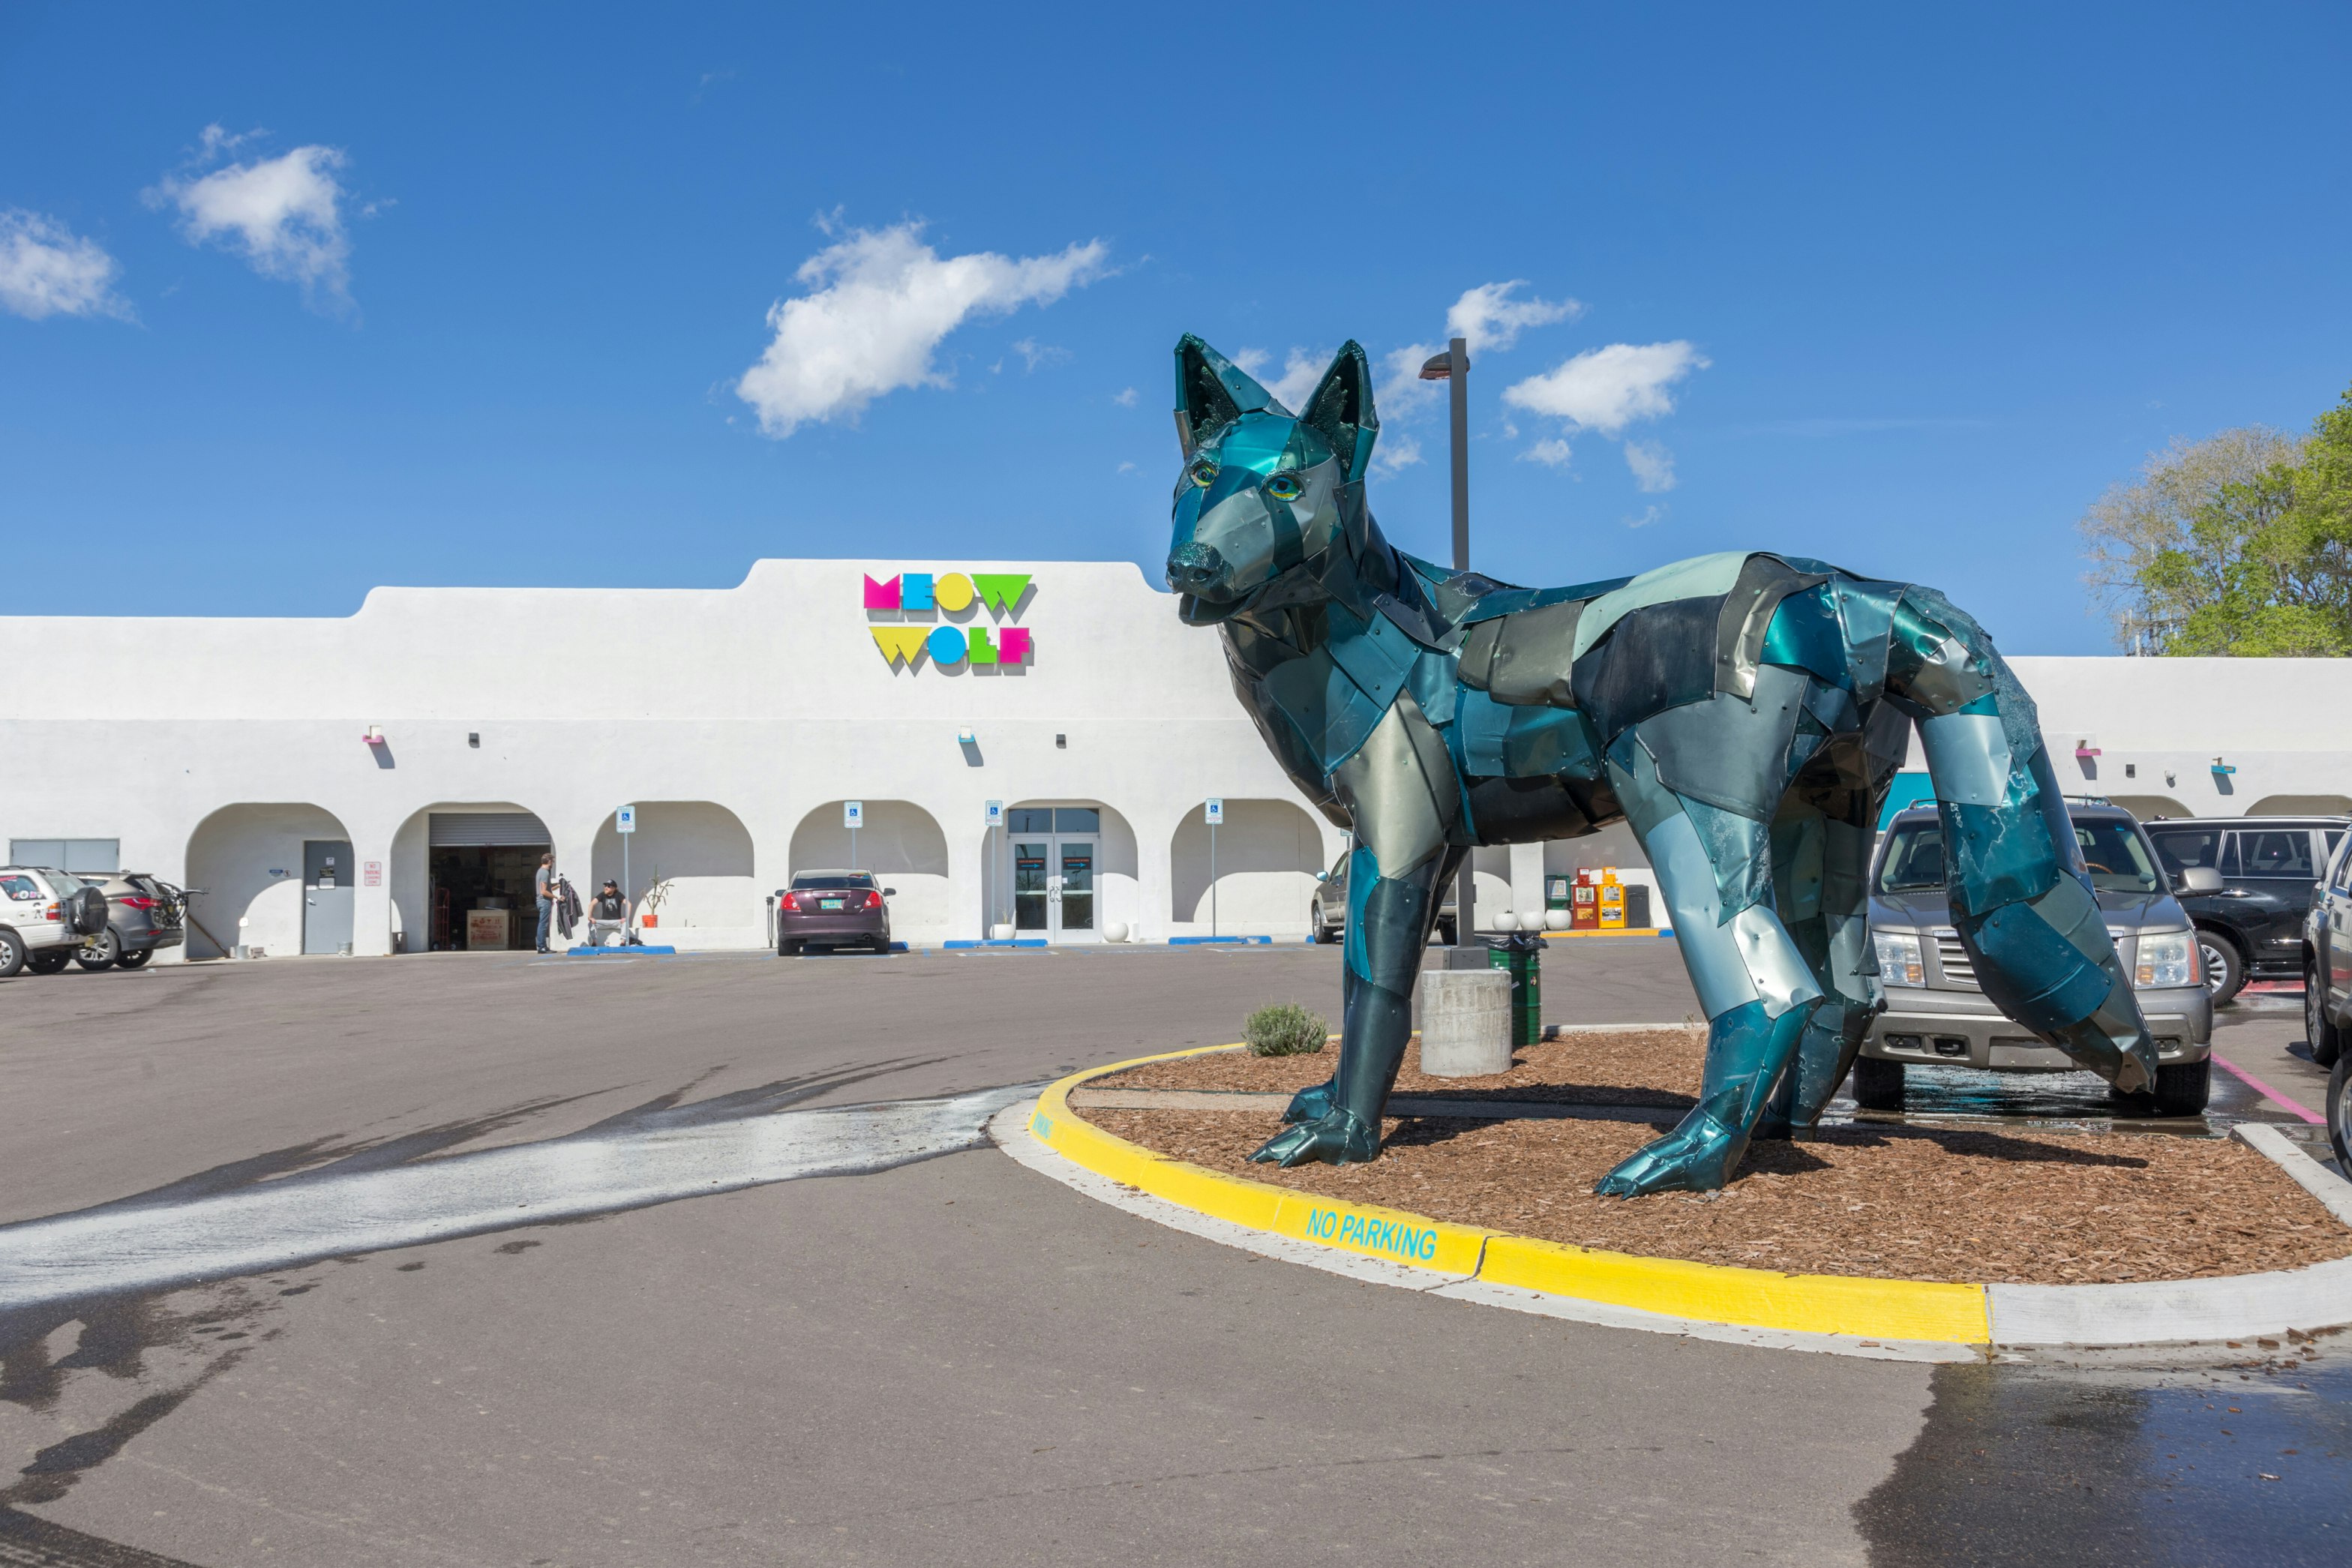 Santa Fe, New Mexico– April 30th, 2017: Meow Wolf art collective in Santa Fe, New Mexico, United States. Open to the public the main exhibit is the The House of Eternal Return..; Shutterstock ID 632888321; Your name (First / Last): Alexander Howard; GL account no.: 65050; Netsuite department name: Online Editorial; Full Product or Project name including edition: Southwest POIs